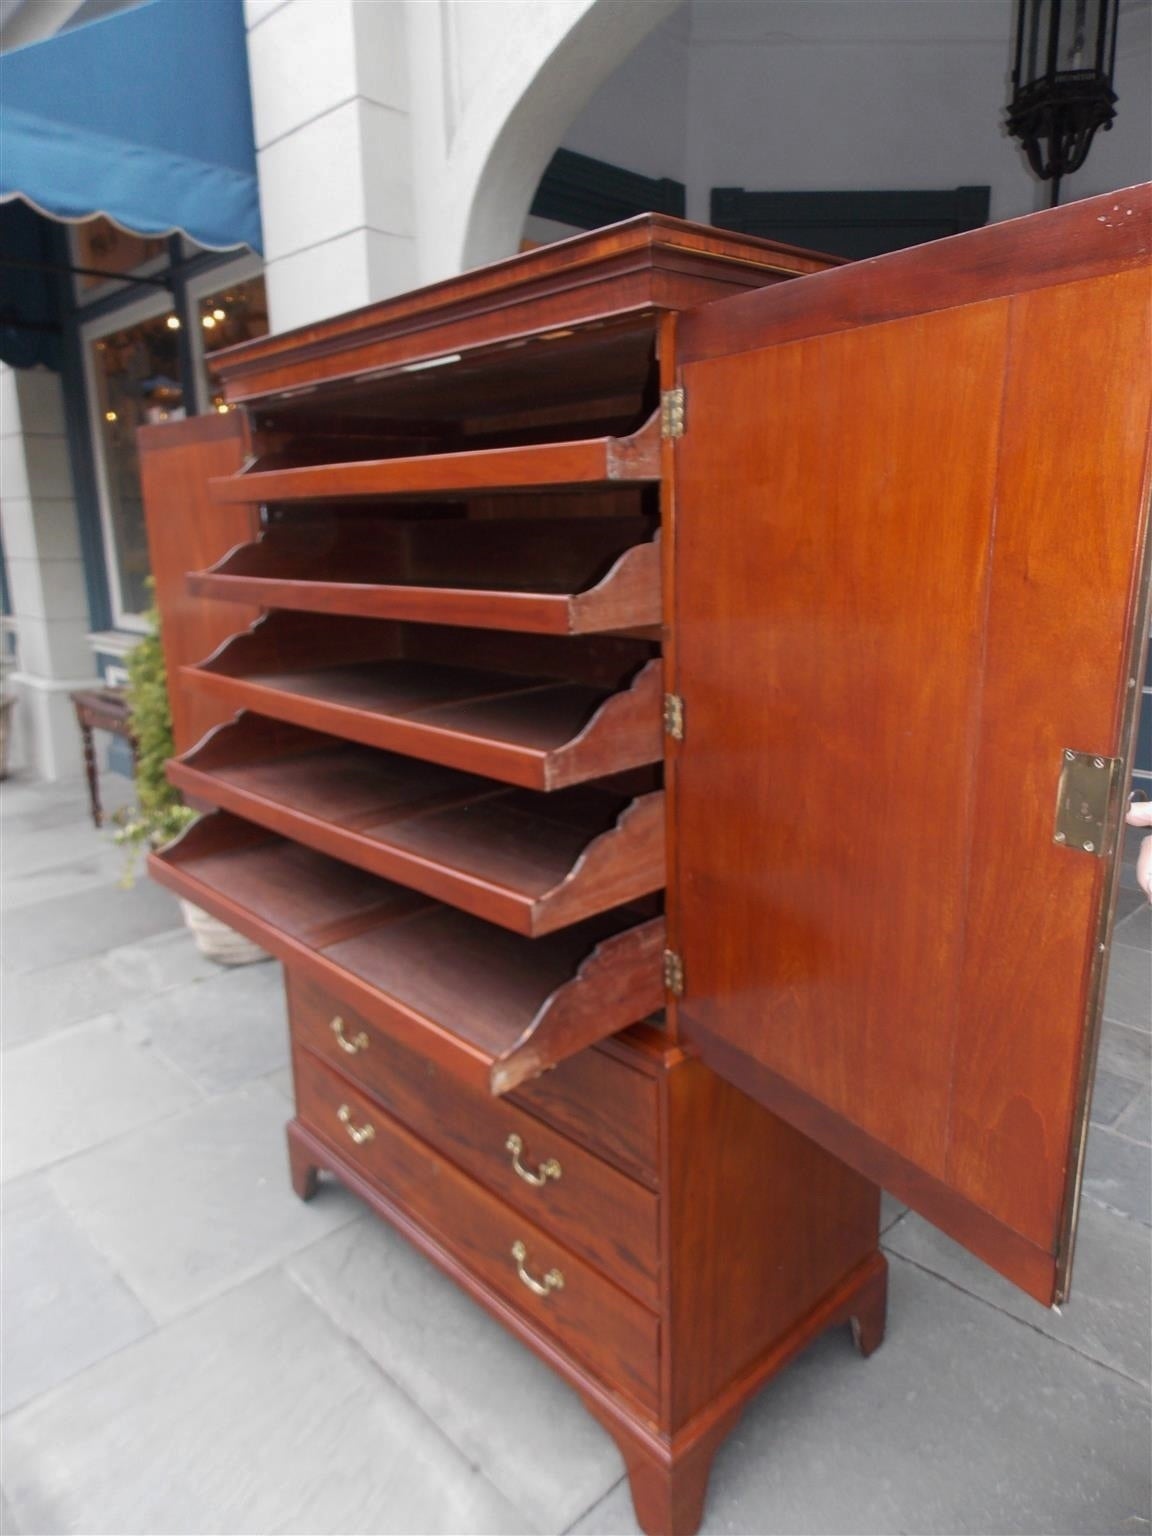 Late 18th Century American Chippendale Mahogany Inlaid Book Matched Linen Press, Circa 1785